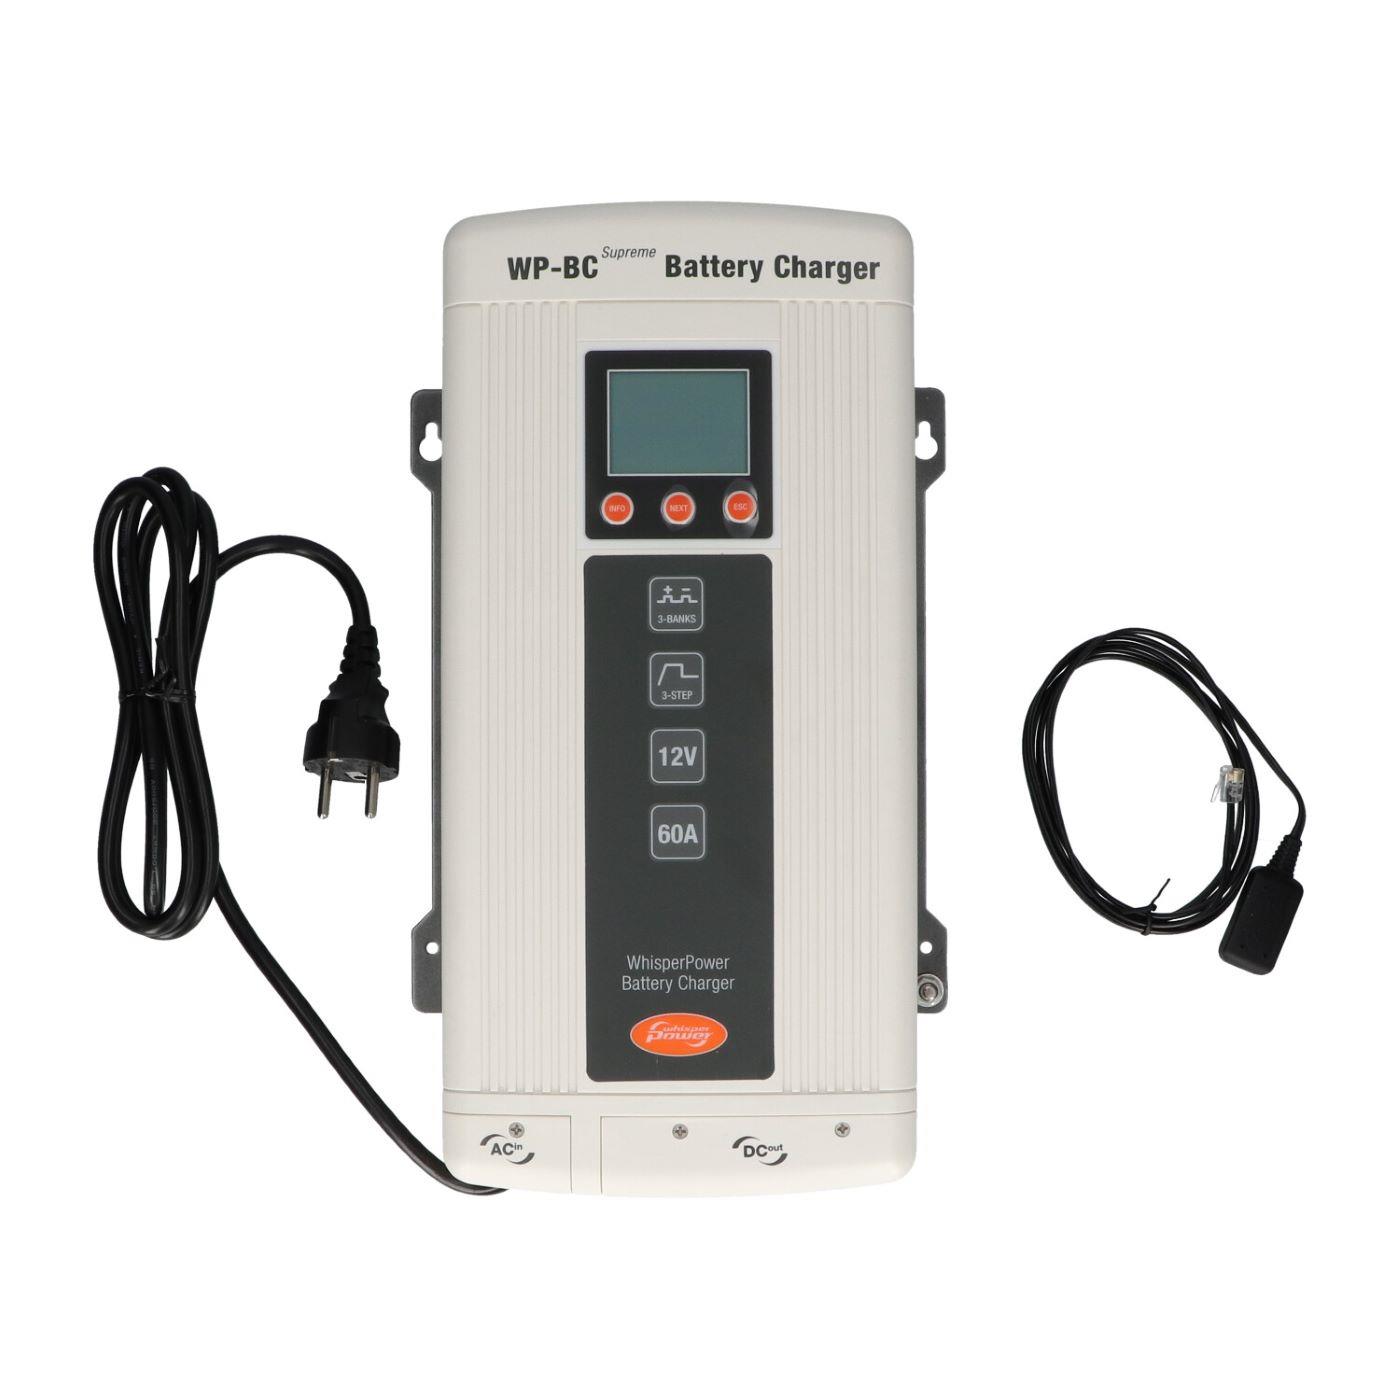 WhisperPower BC Supreme Serie Battery charger 12V / 60A - 3x output